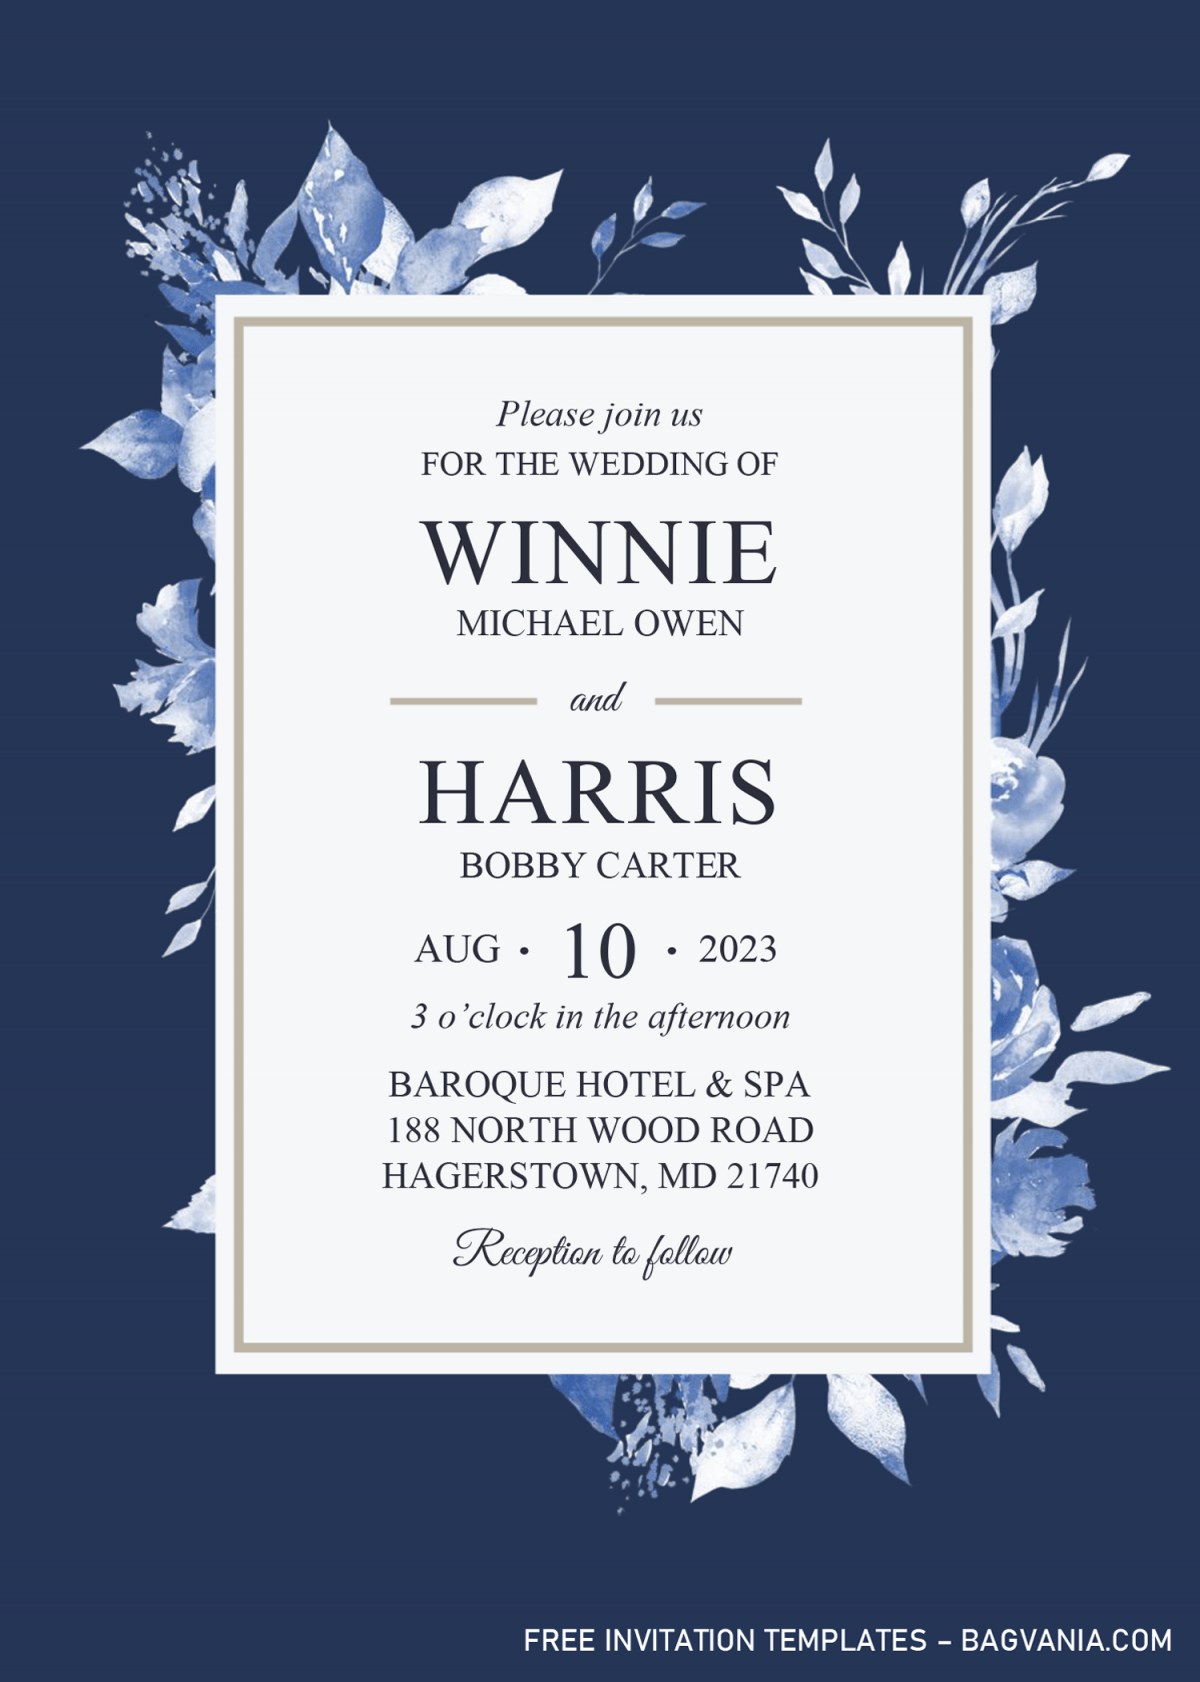 Modern Navy Invitation Templates - Editable With Microsoft Word and has 